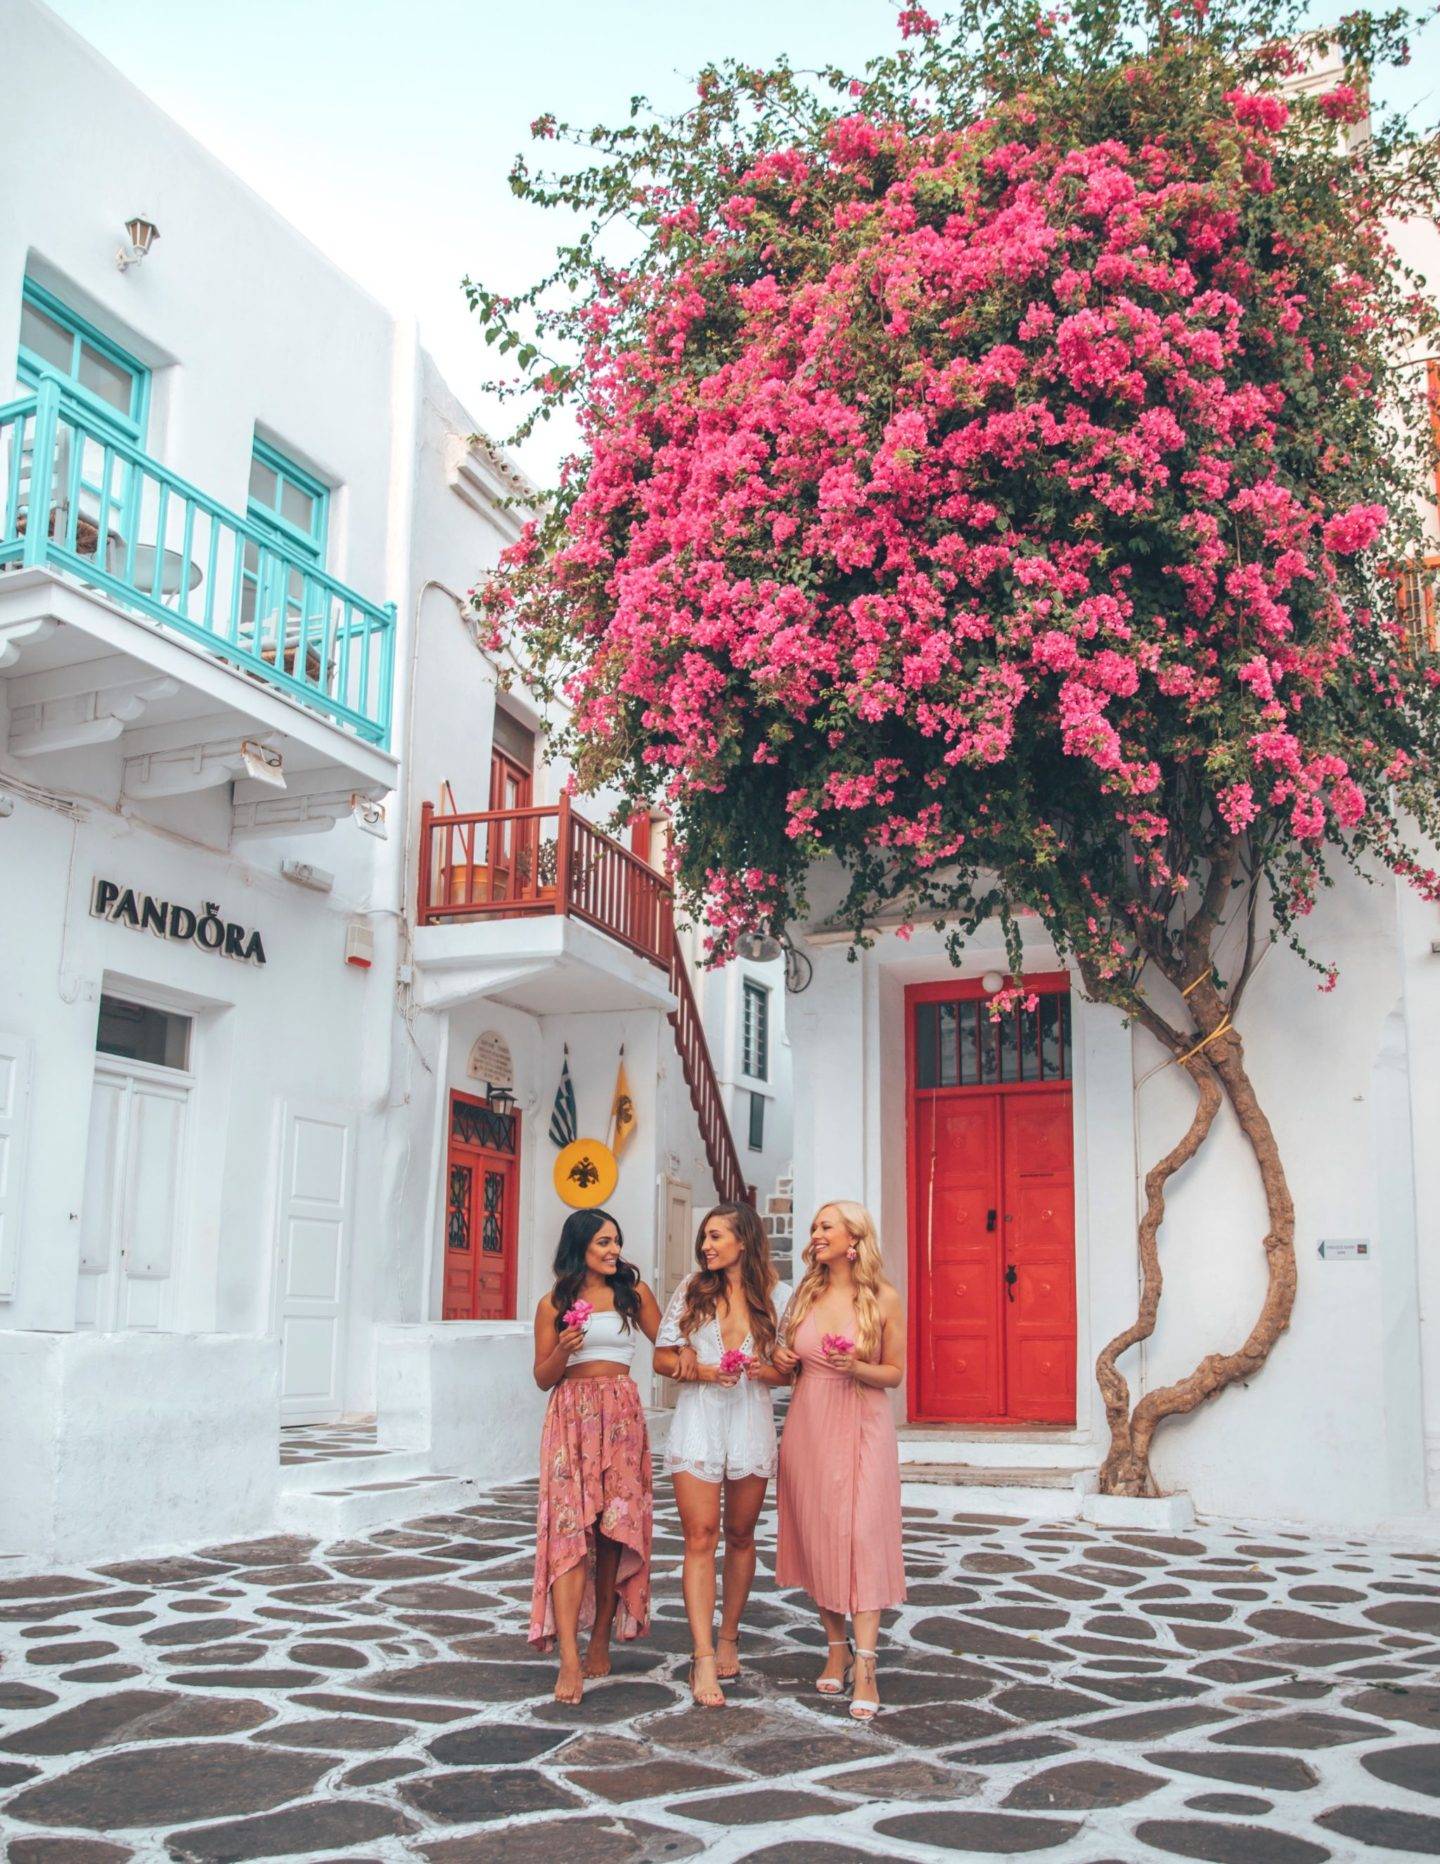 The pandora store - one of the most instagrammable places in Mykonos. Click the photo to see the rest of my list of the most instagrammable places in Mykonos! 